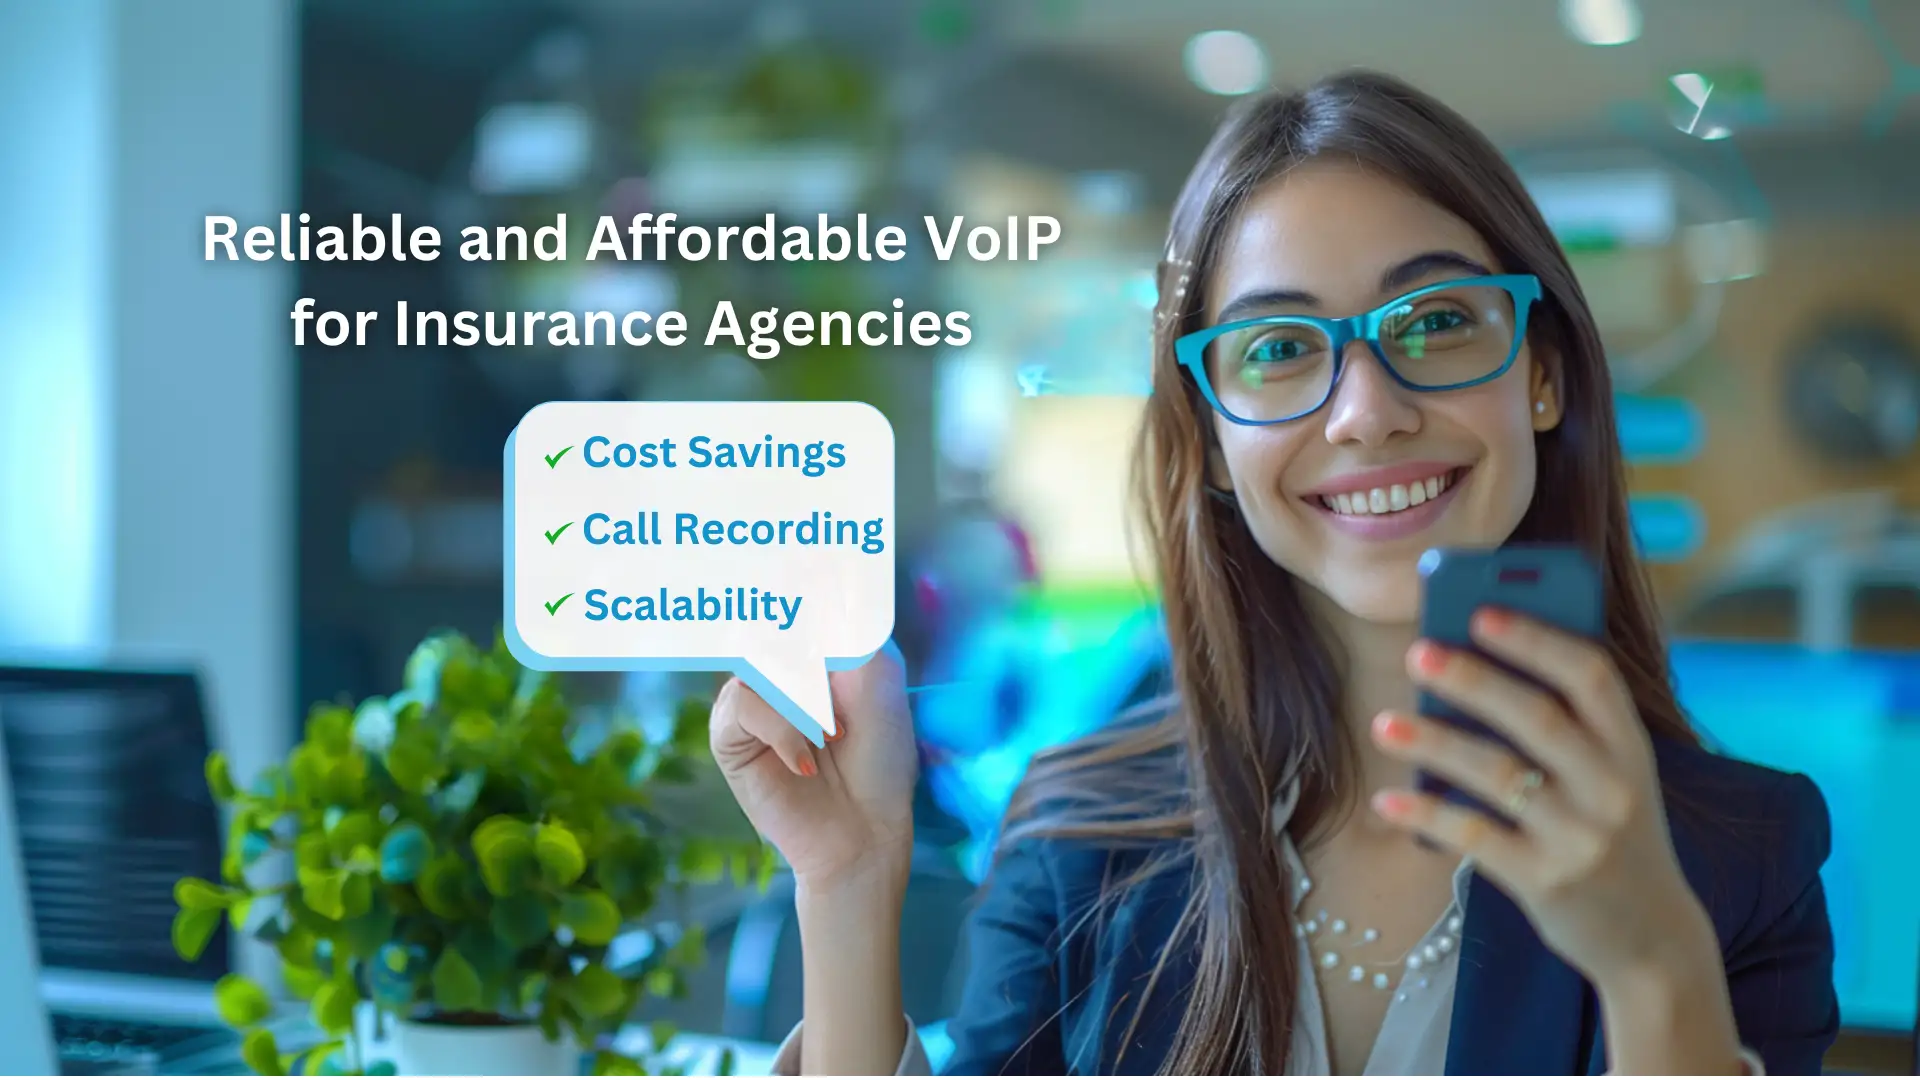 Reliable and Affordable VoIP Solutions for Insurance Agencies